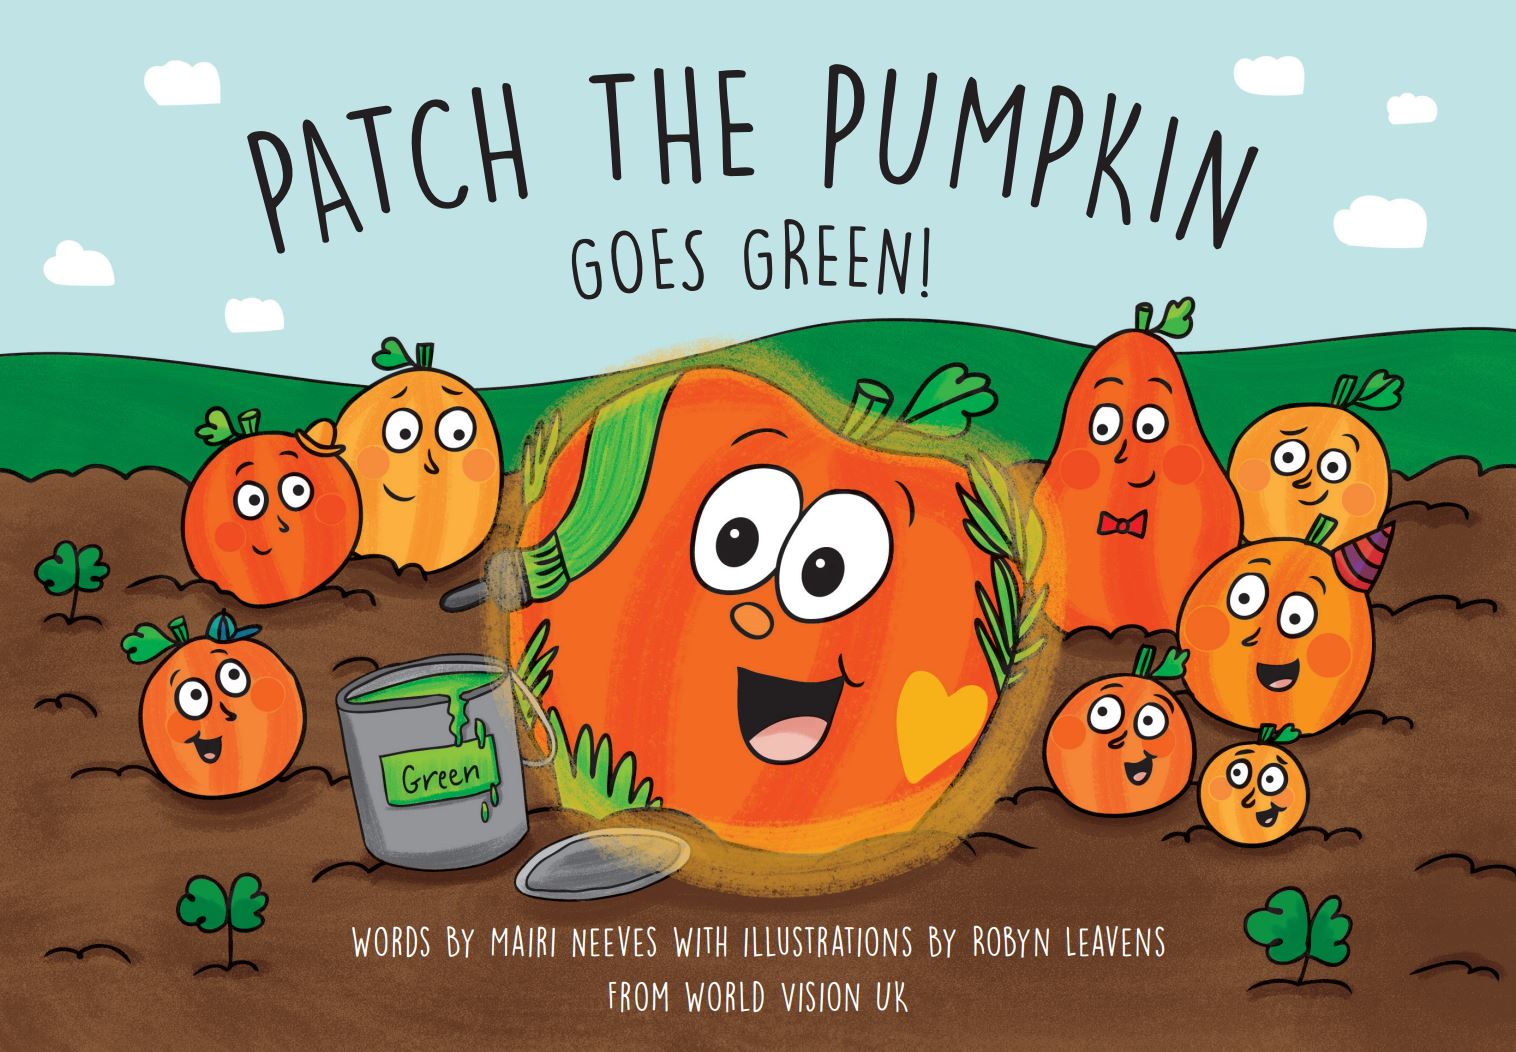 The cover for the storybook - Patch the Pumpkin Goes Green